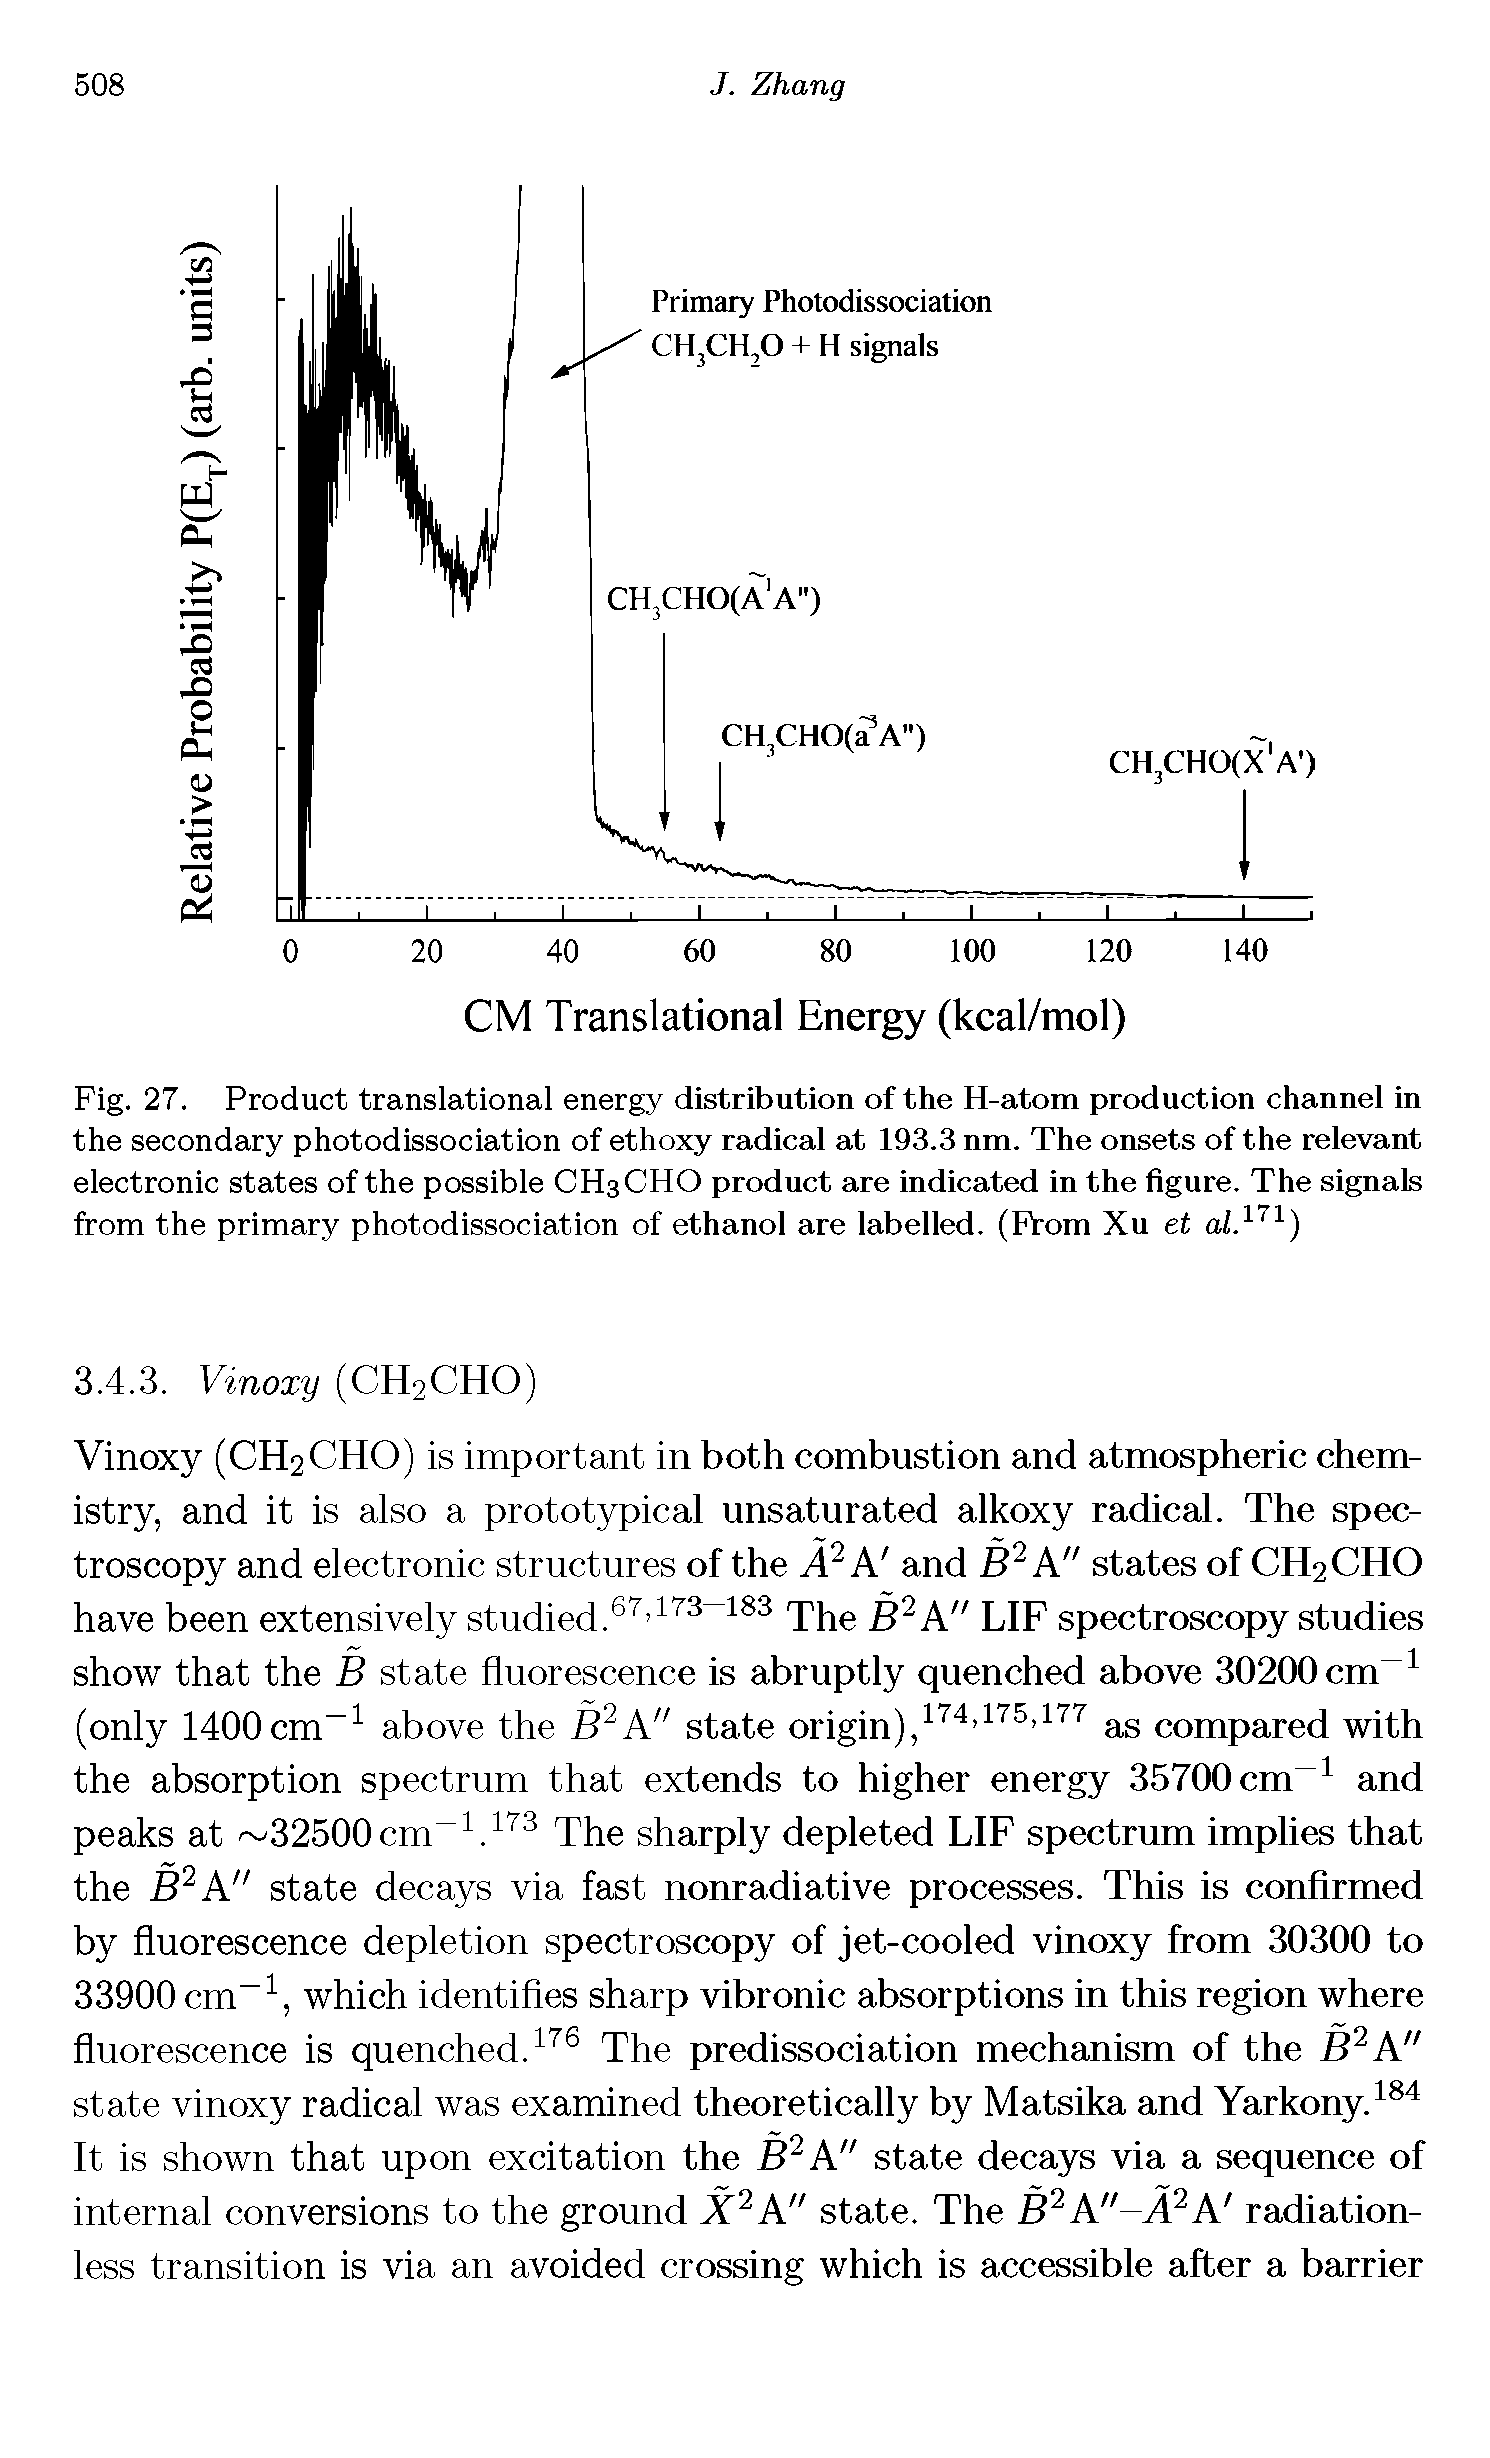 Fig. 27. Product translational energy distribution of the H-atom production channel in the secondary photodissociation of ethoxy radical at 193.3 nm. The onsets of the relevant electronic states of the possible CH3CHO product are indicated in the figure. The signals from the primary photodissociation of ethanol are labelled. (FYom Xu et al.171)...